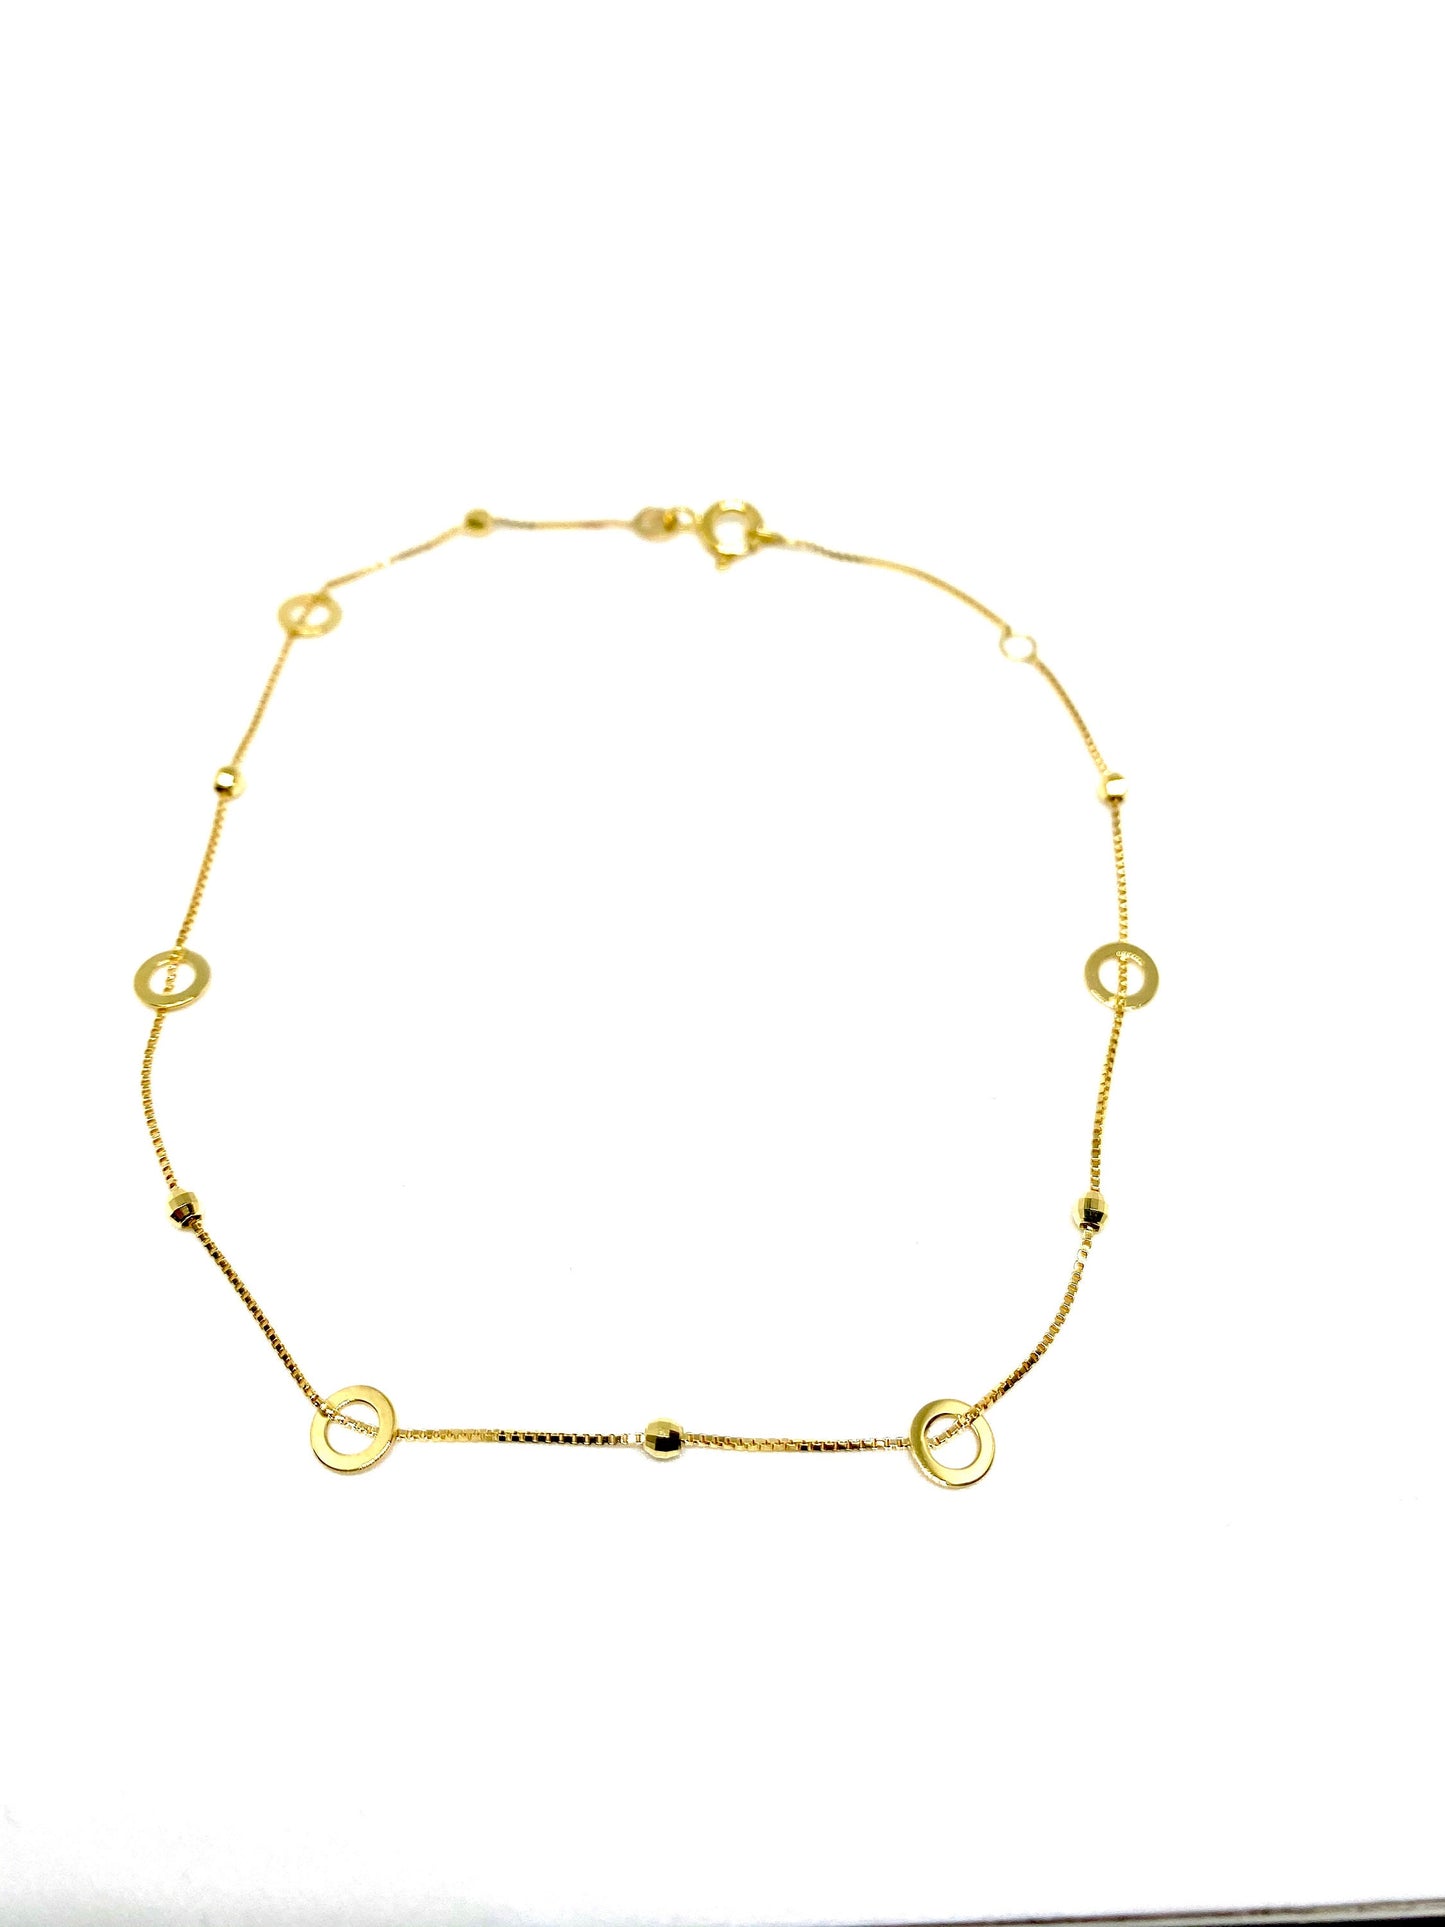 Solid Yellow gold Bead/Circle Station adjustable ANKLET BRACELET